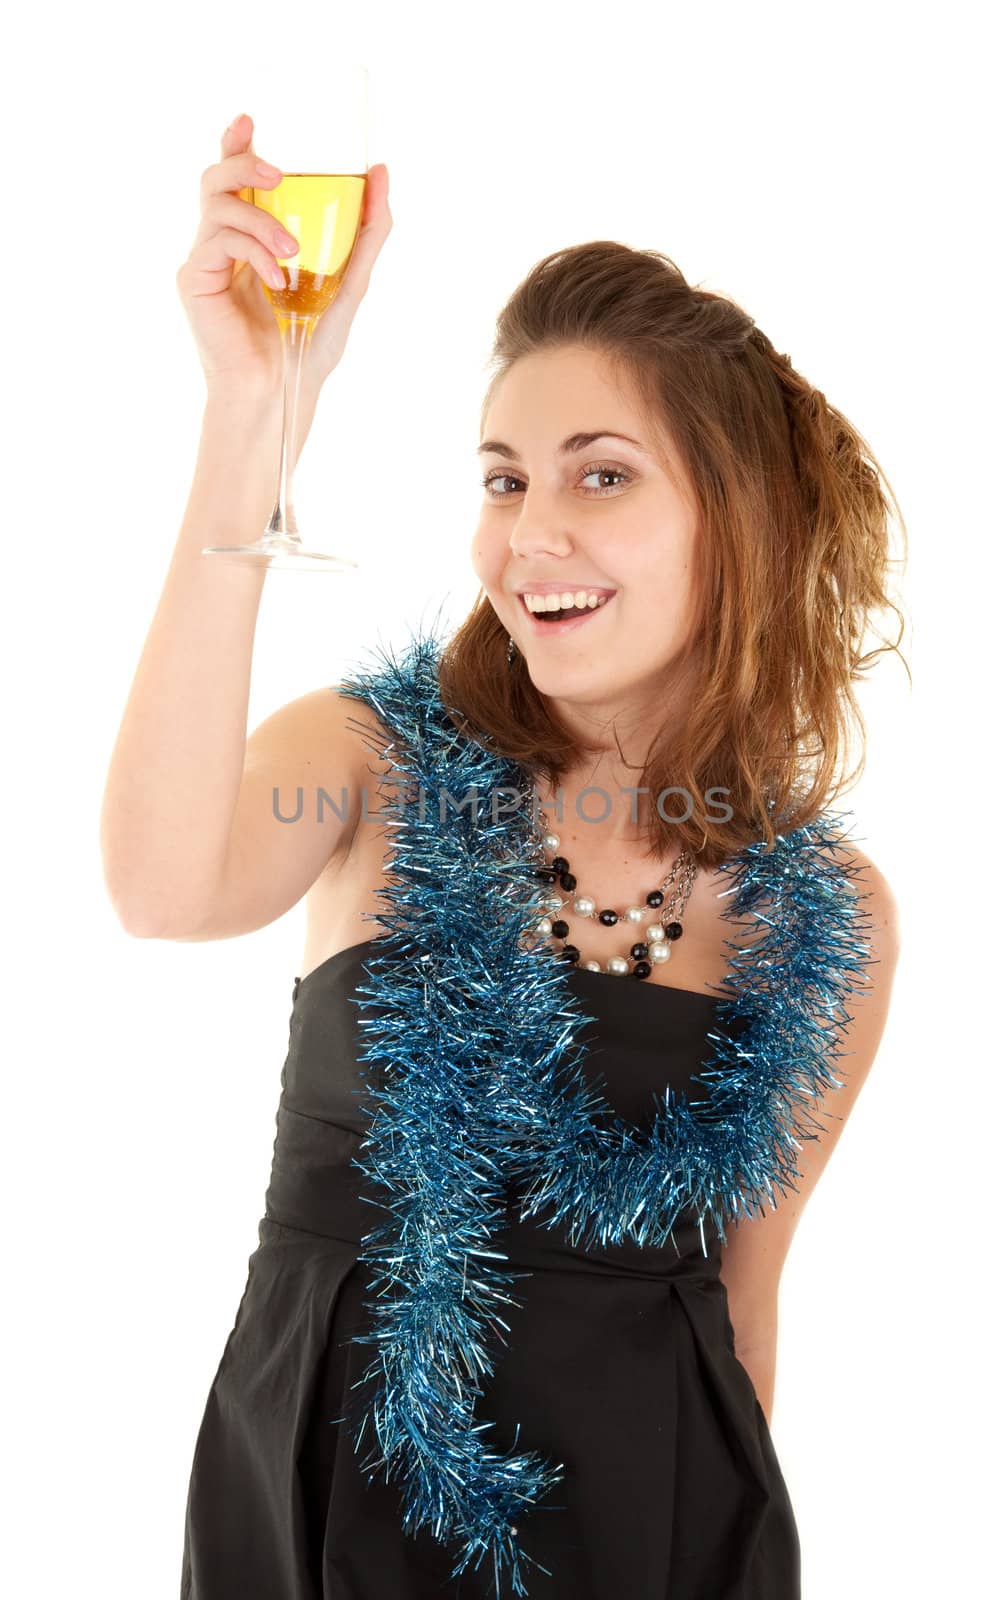 Beautiful woman with a glass of champagne on white background. Focus on woman's eyes.